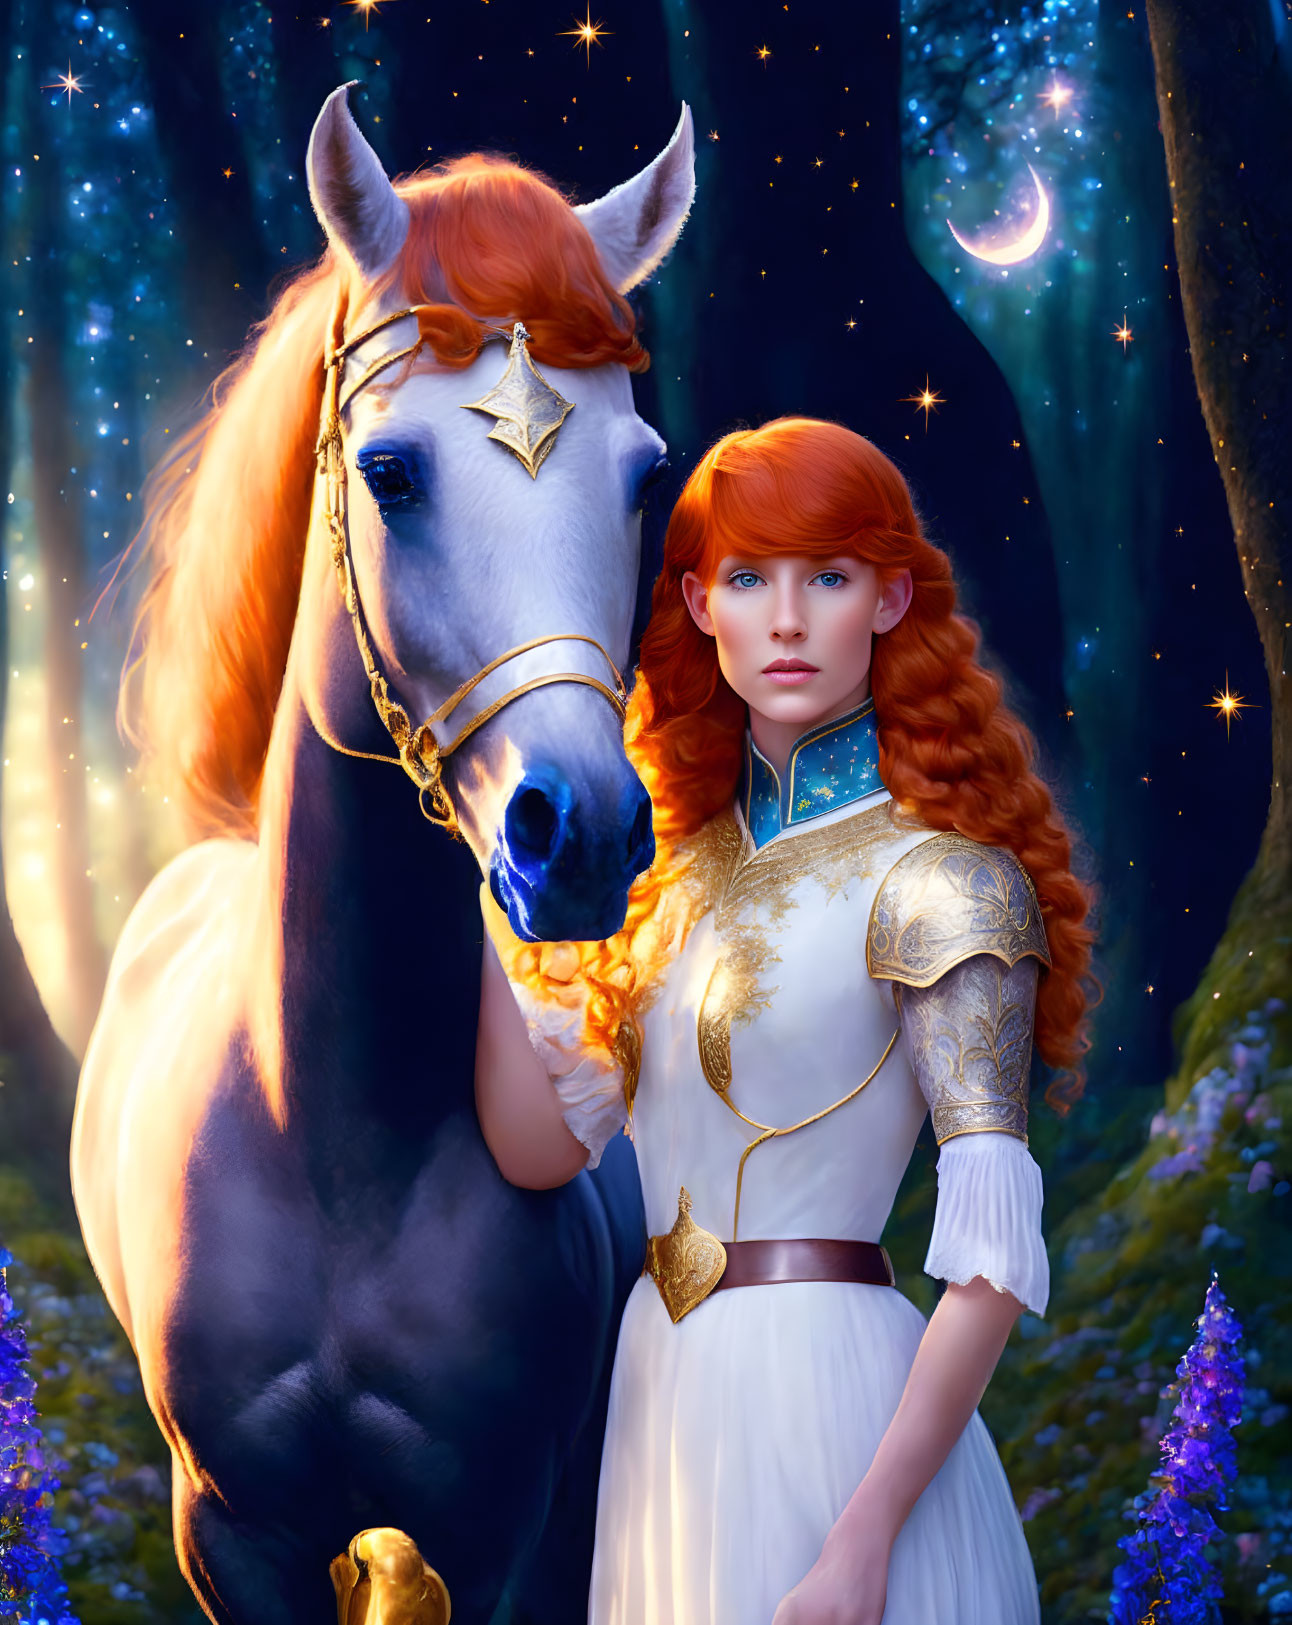 Fantasy woman with horse II